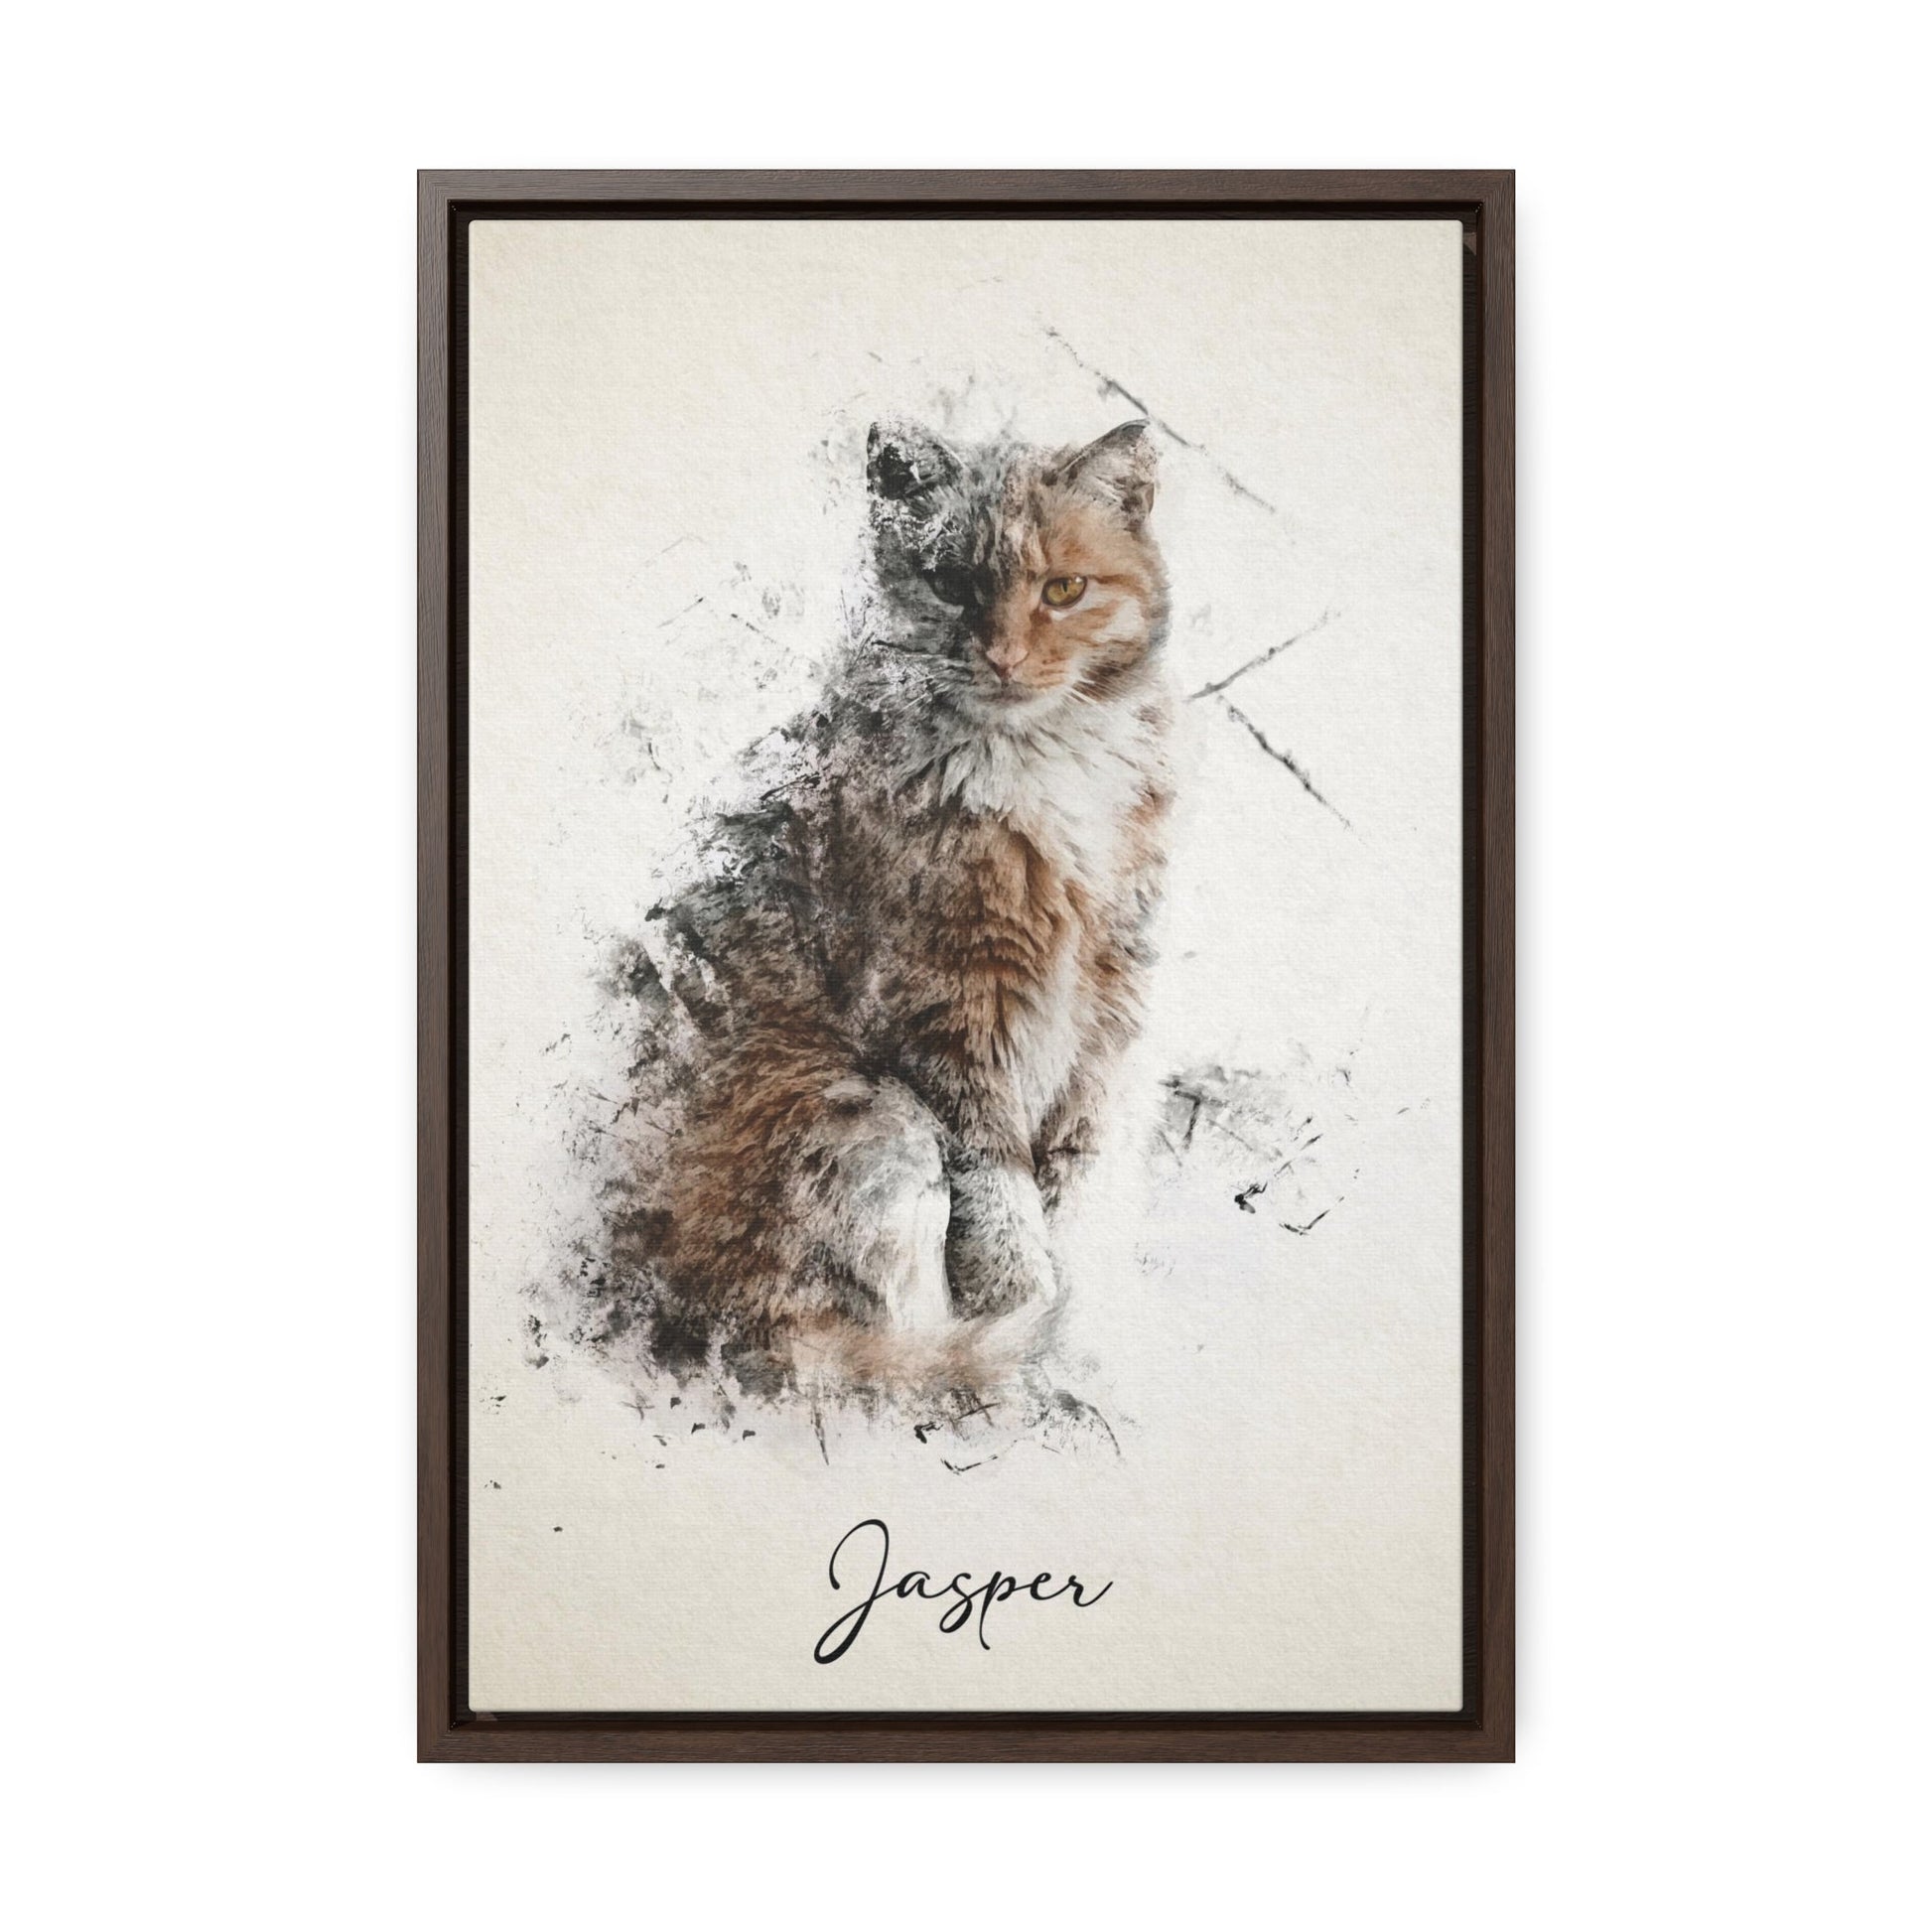 "Custom cat portrait on canvas, personalized and beautifully framed.